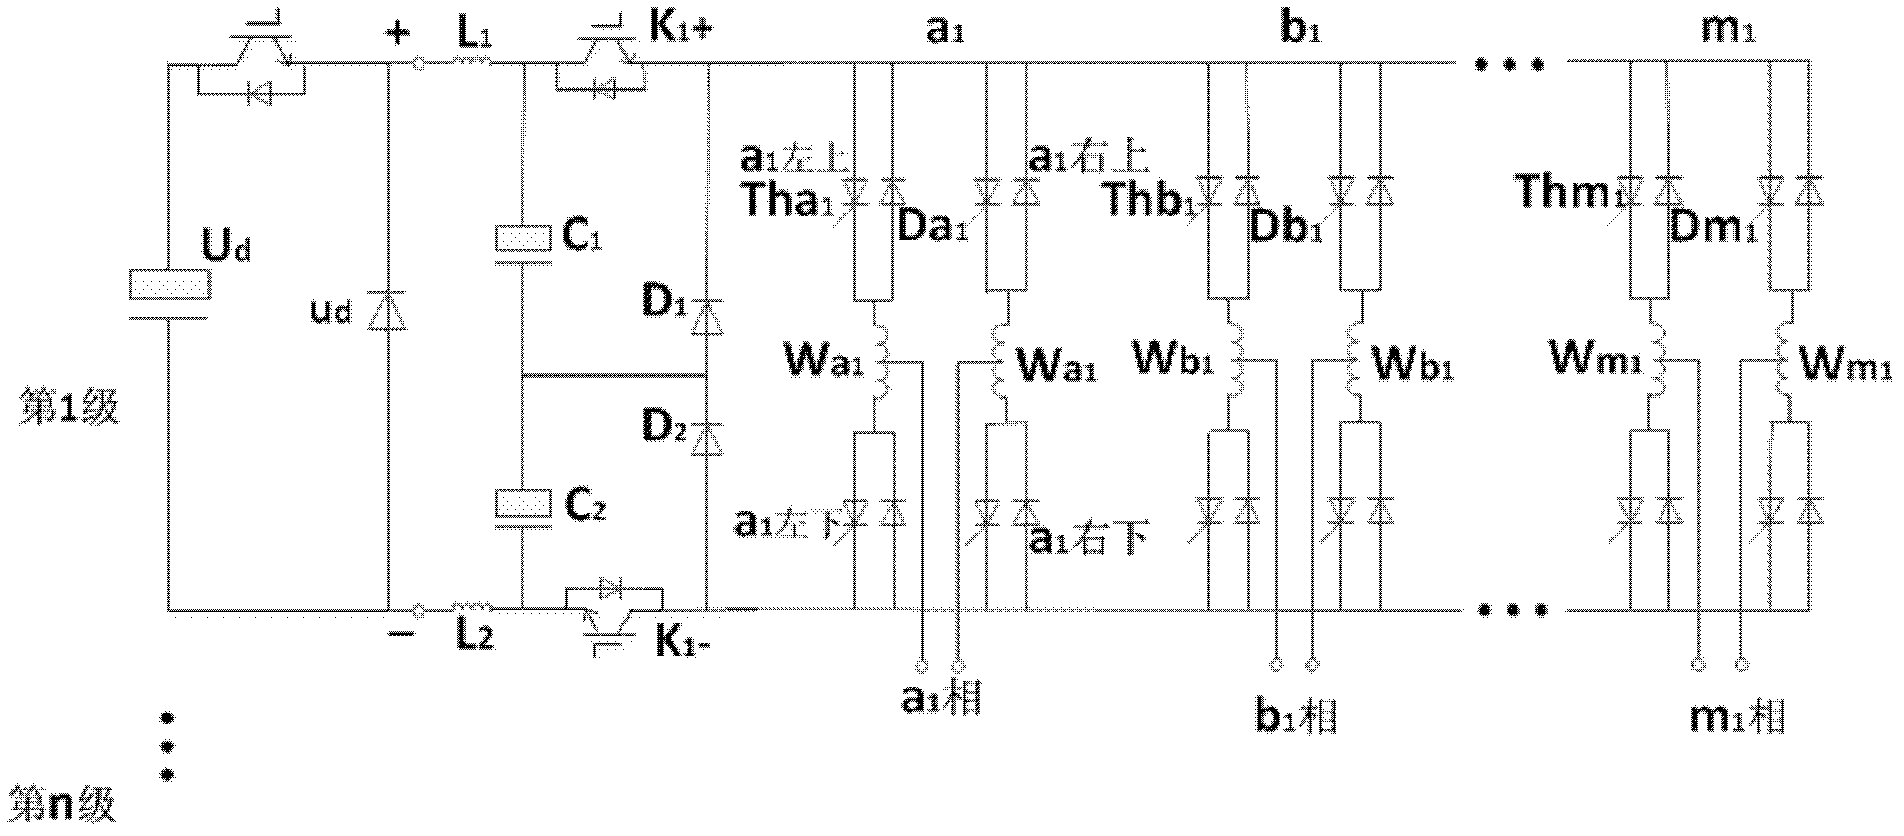 Multiphase square wave inverter realizing commutation by utilizing insulated gate bipolar transistors (IGBT) and consisting of thyristors